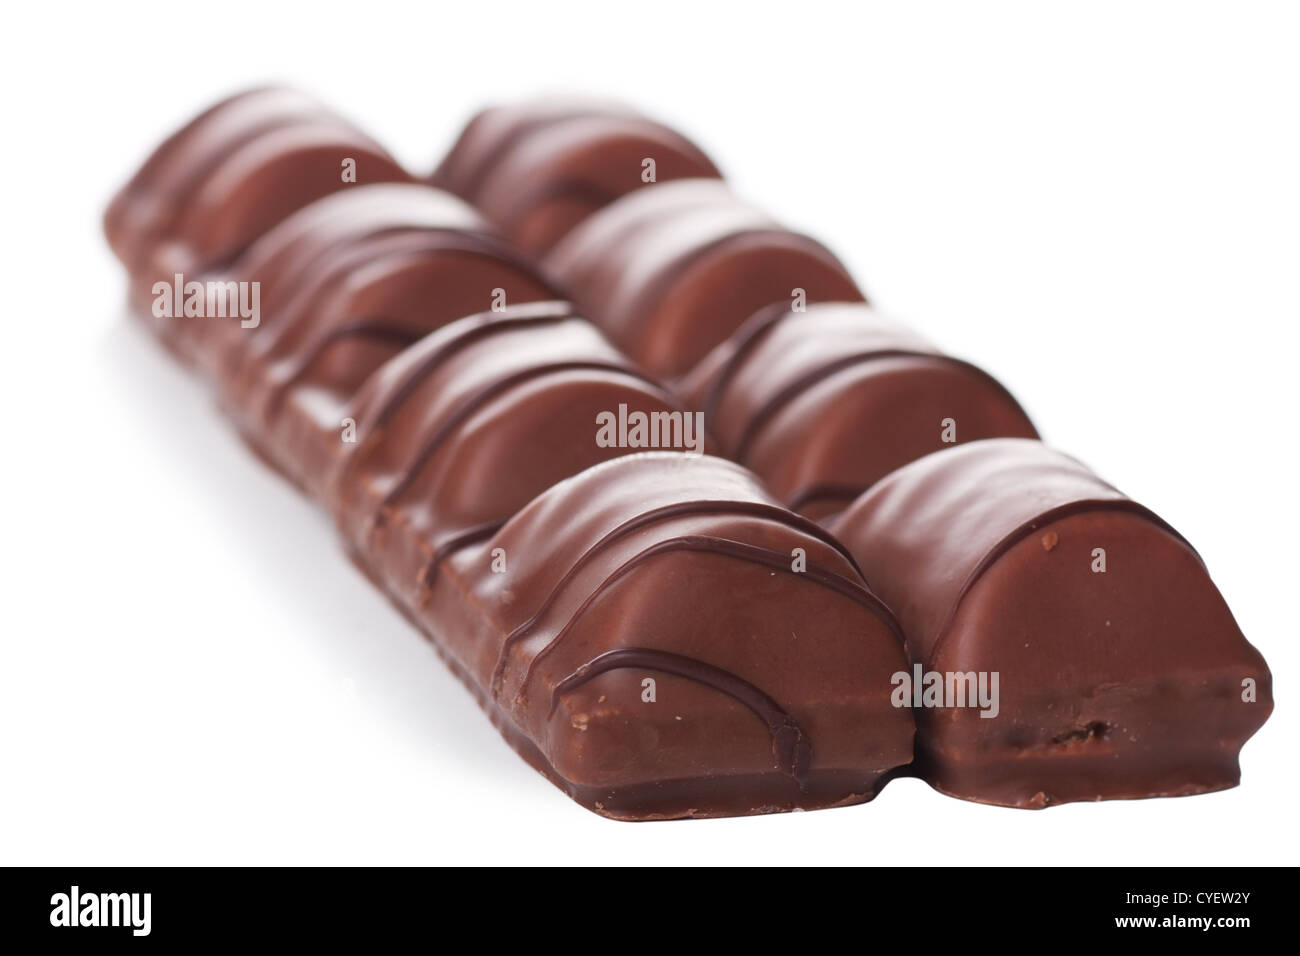 Closeup view of chocolate bars over white background Stock Photo